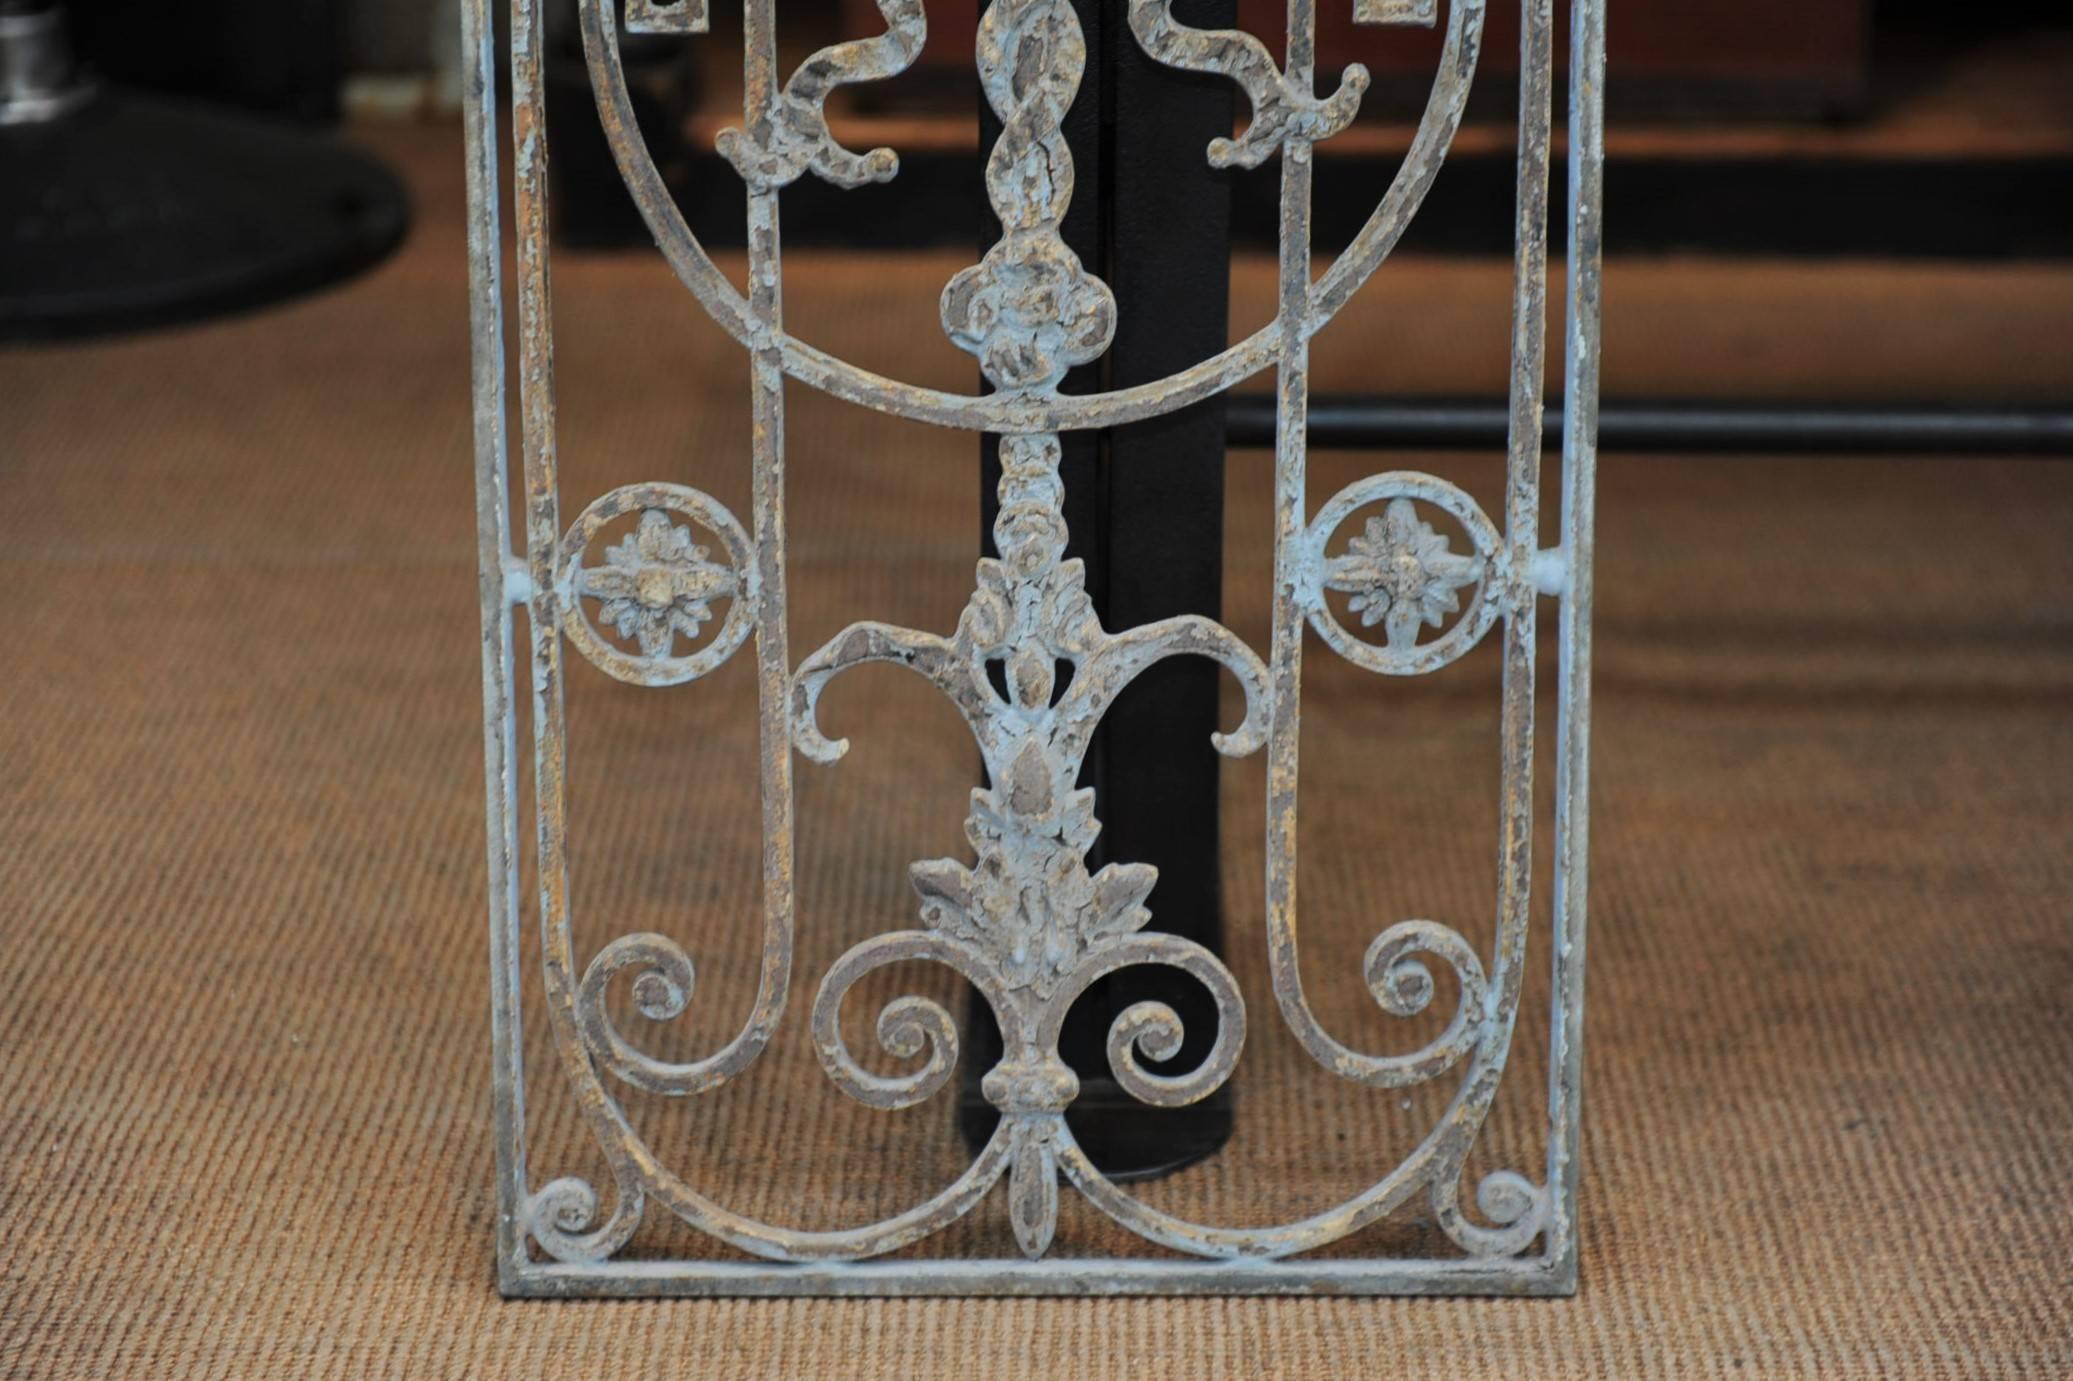 Early 20th Century 1900 French Entrance Doors Cast Iron Flower Gate, Original Grey Patina